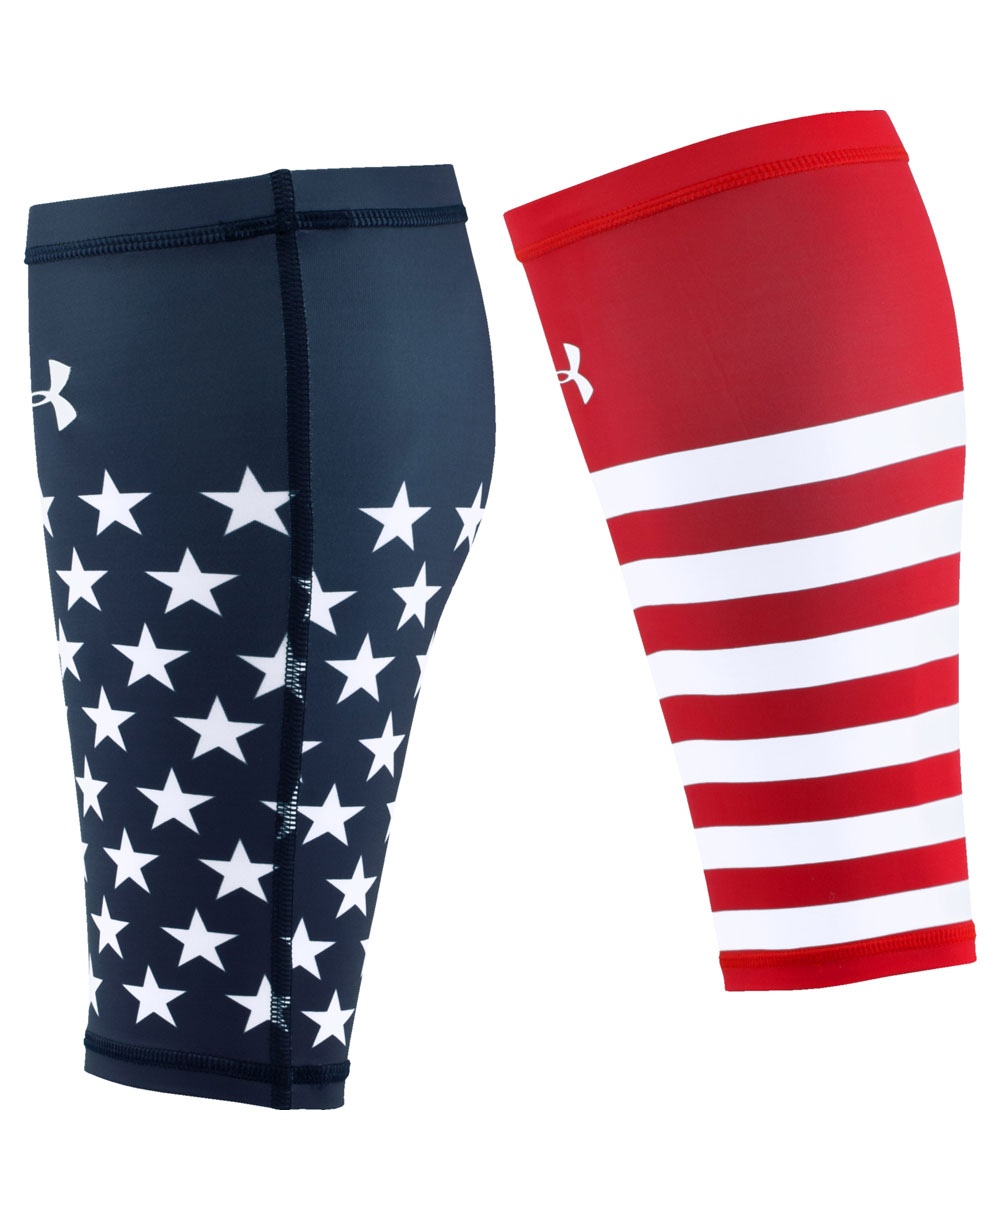 Under Armour Compression Calf Sleeves